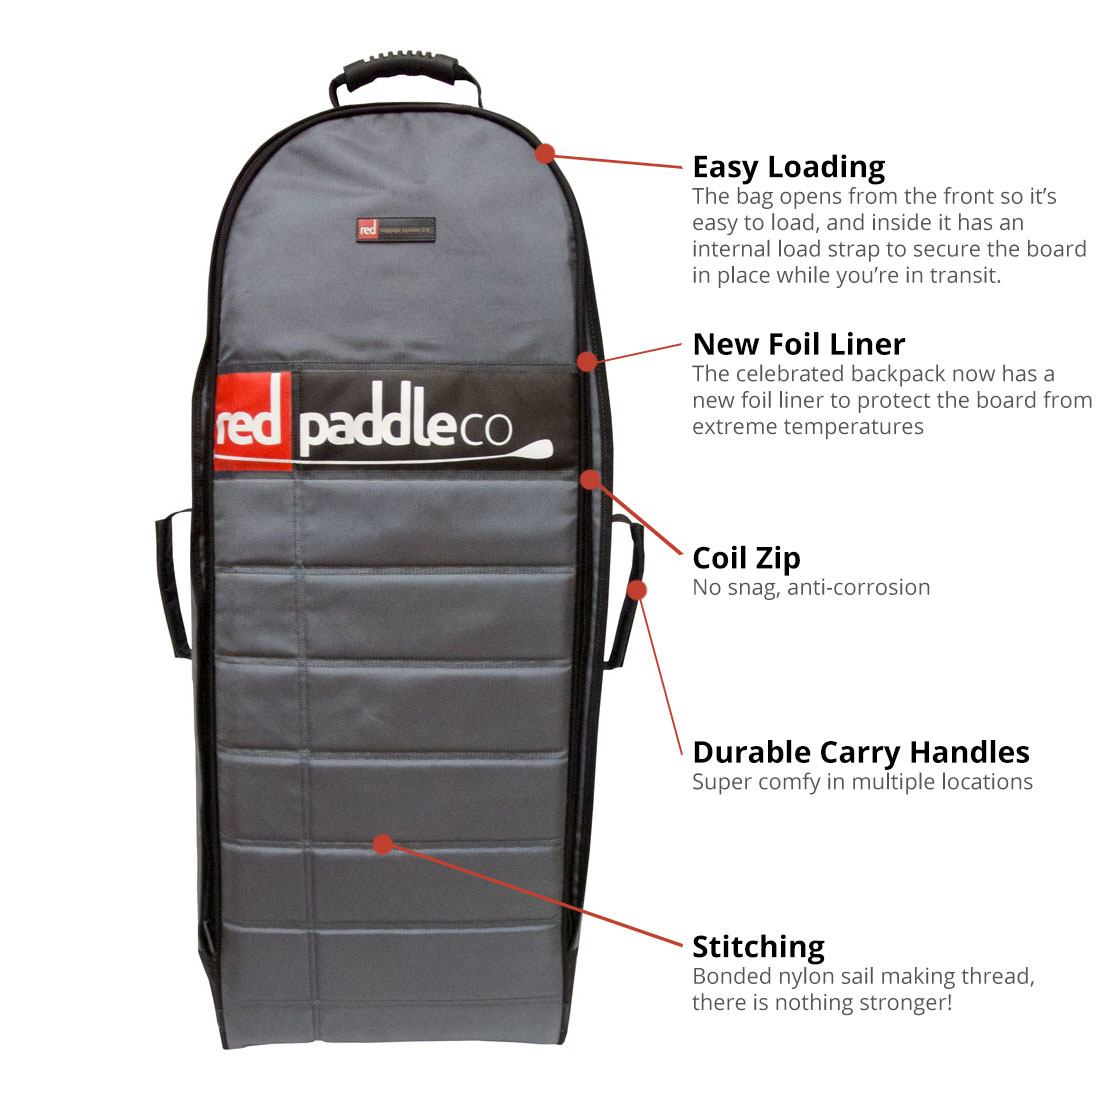 2-red-paddle-co-sup-2017-Bag-Front